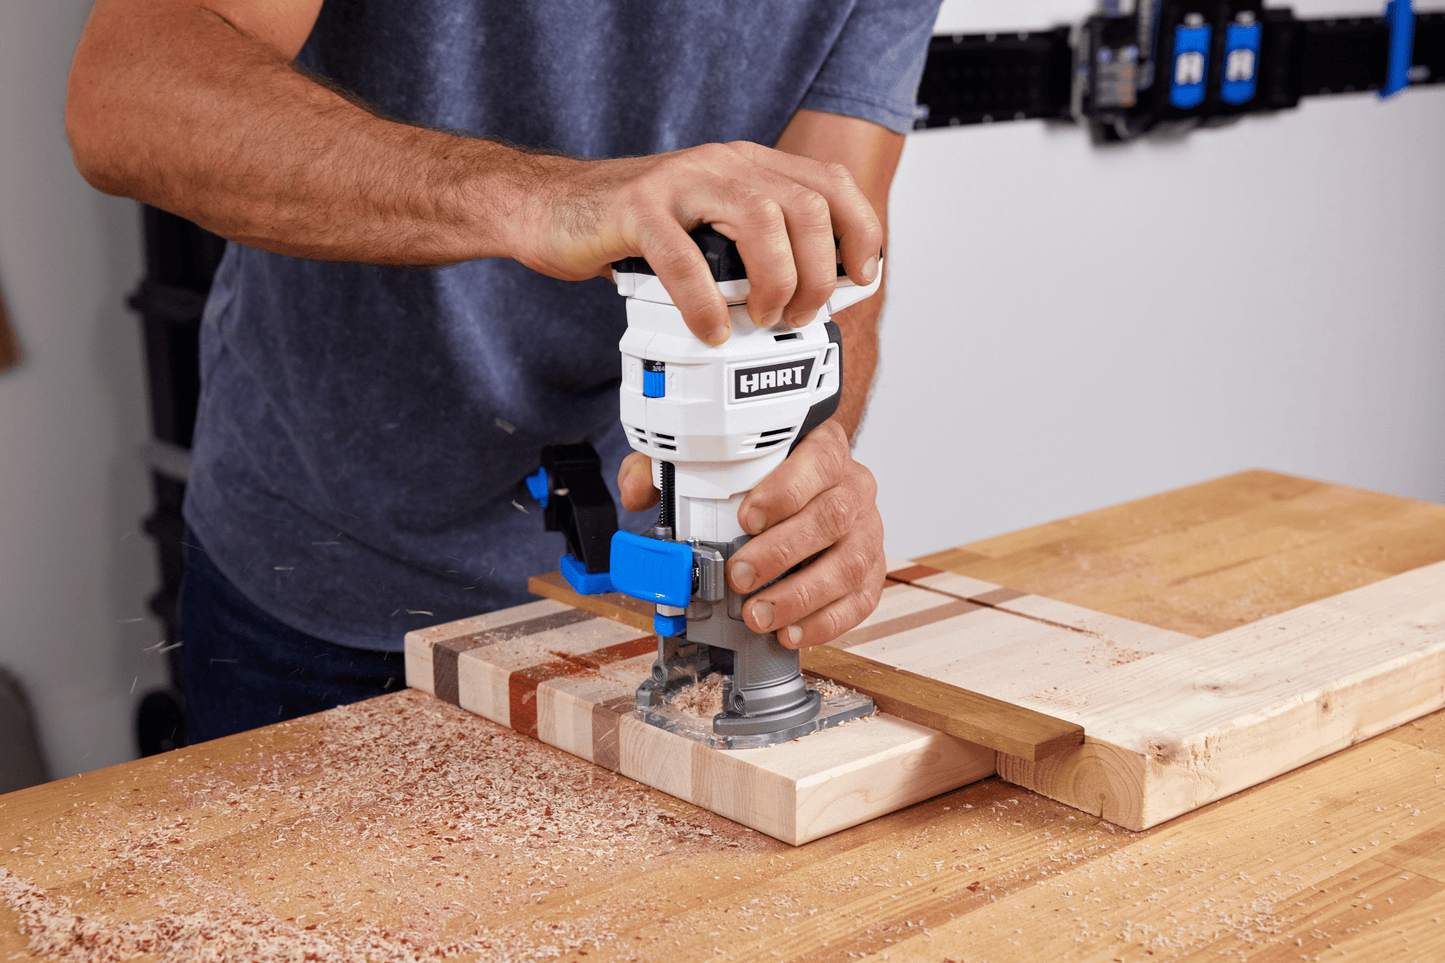 20V Cordless Compact Router Kit